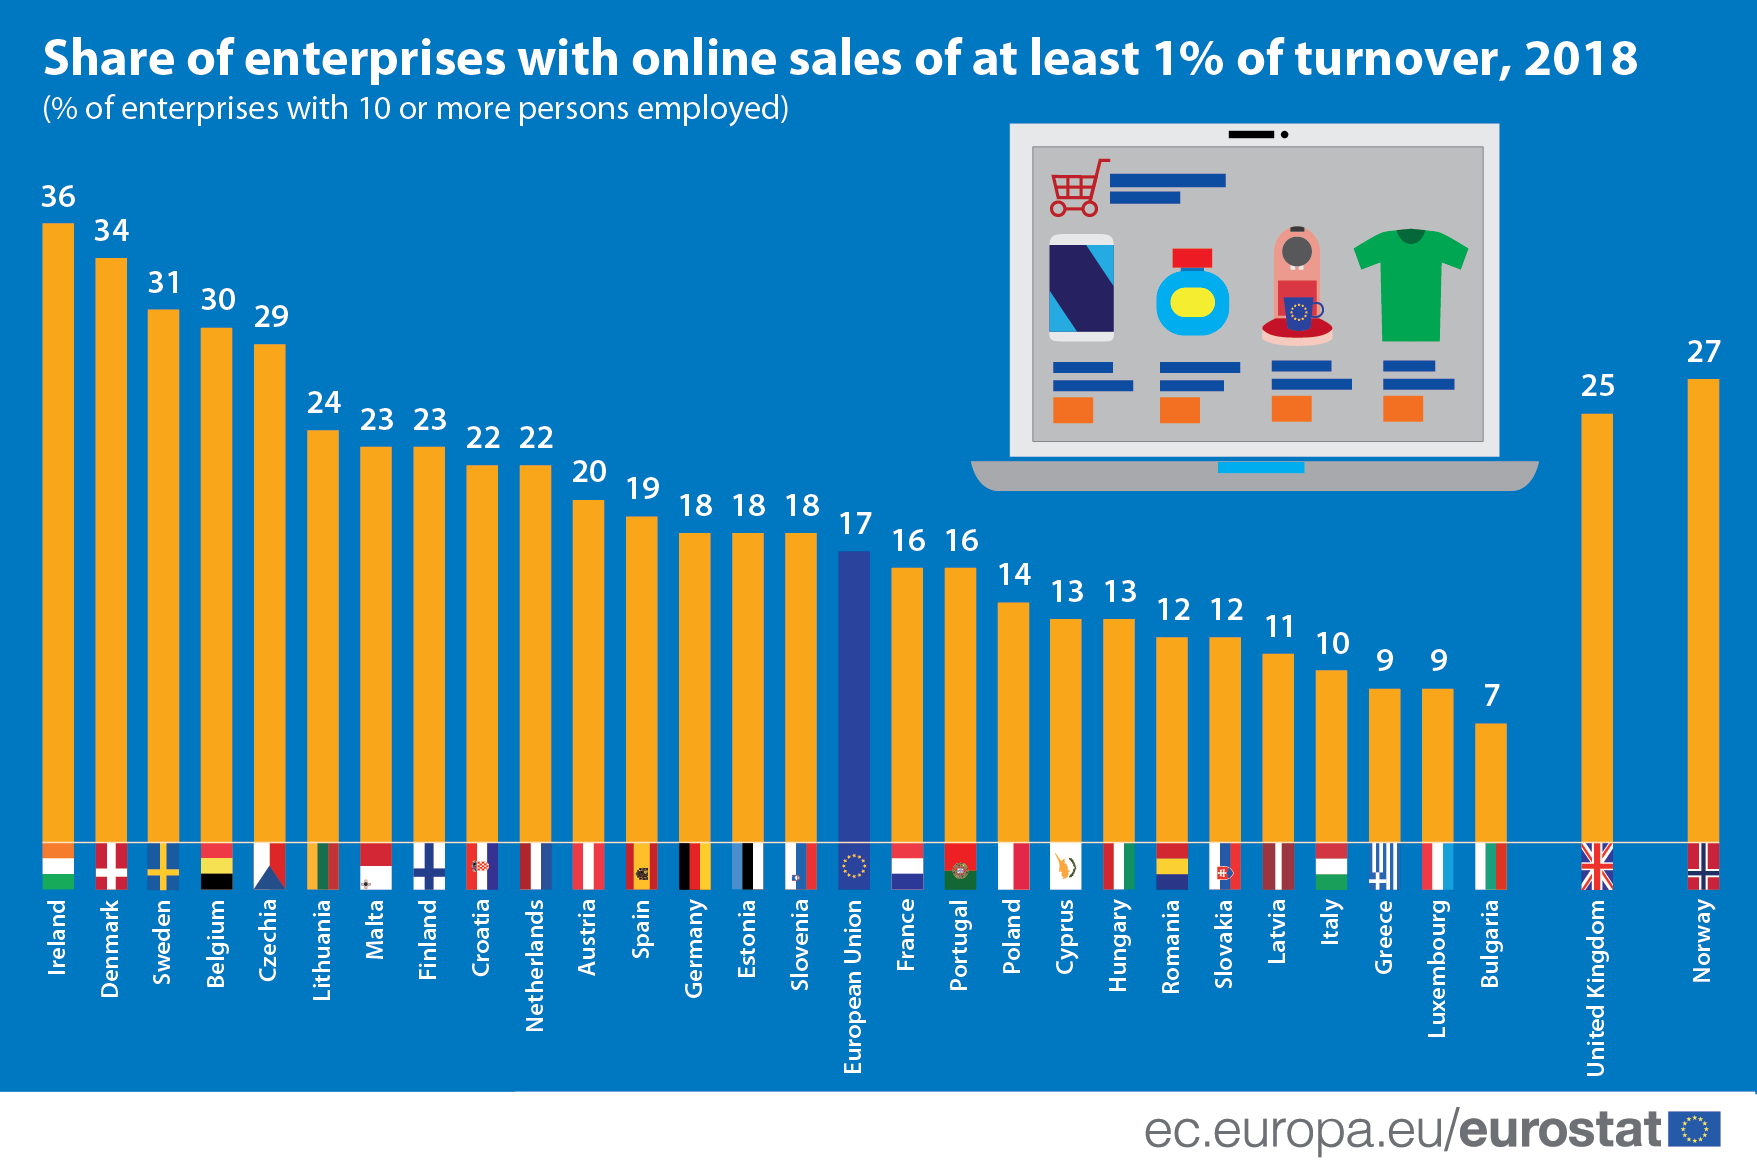 Infographic: Share of enterprises with online sales of at least 1% of turnover, 2018